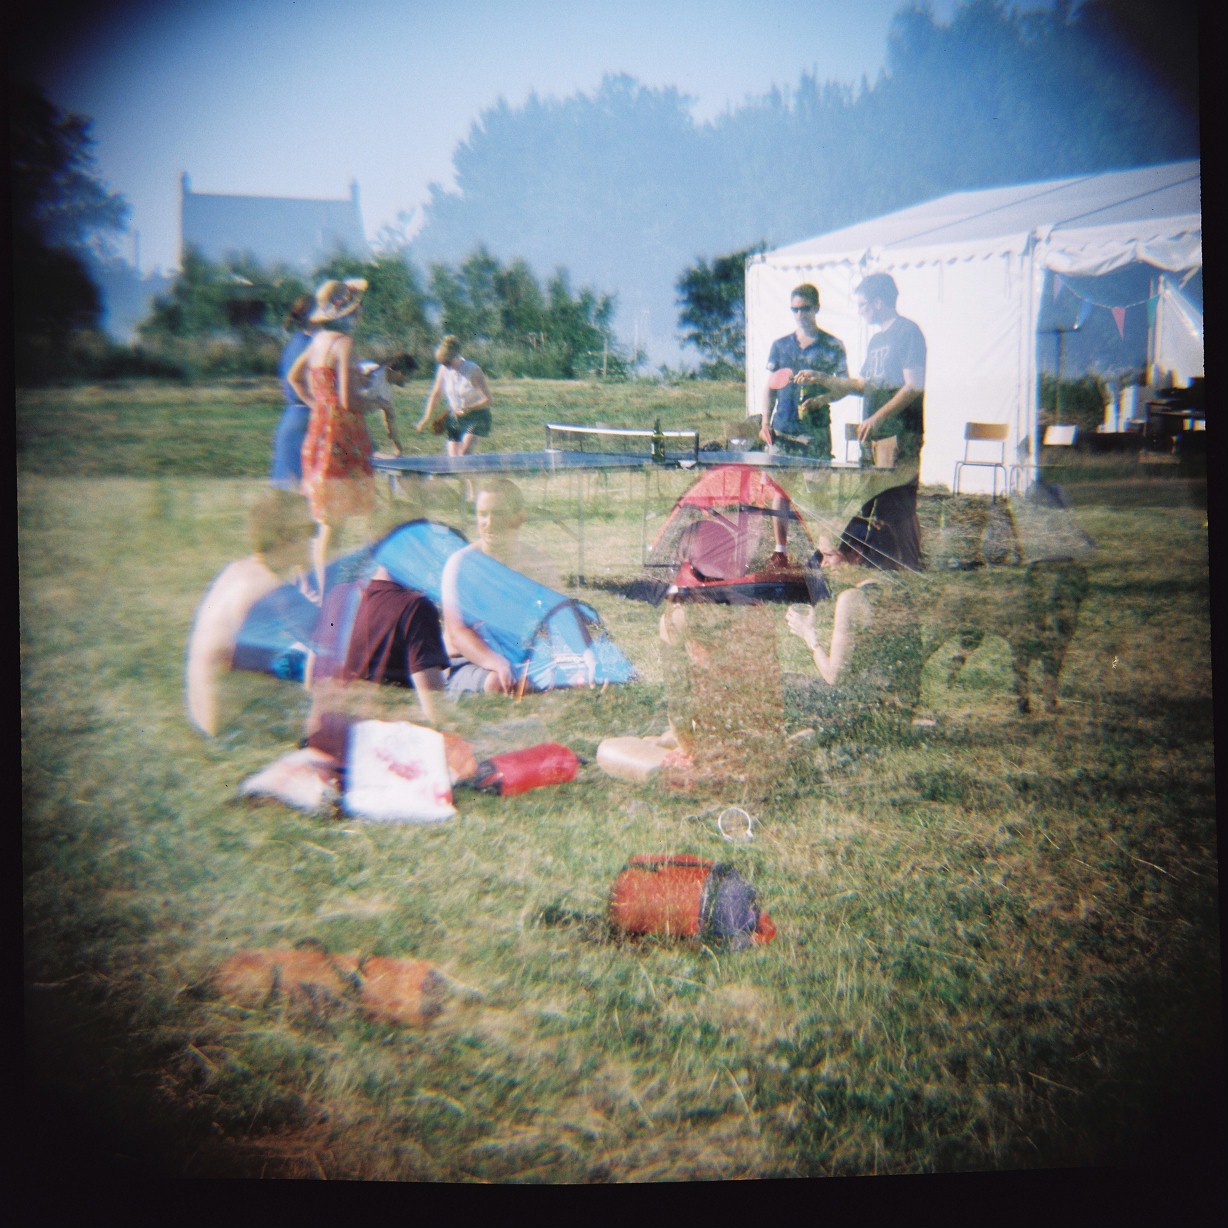 Weekend camping Lomo style